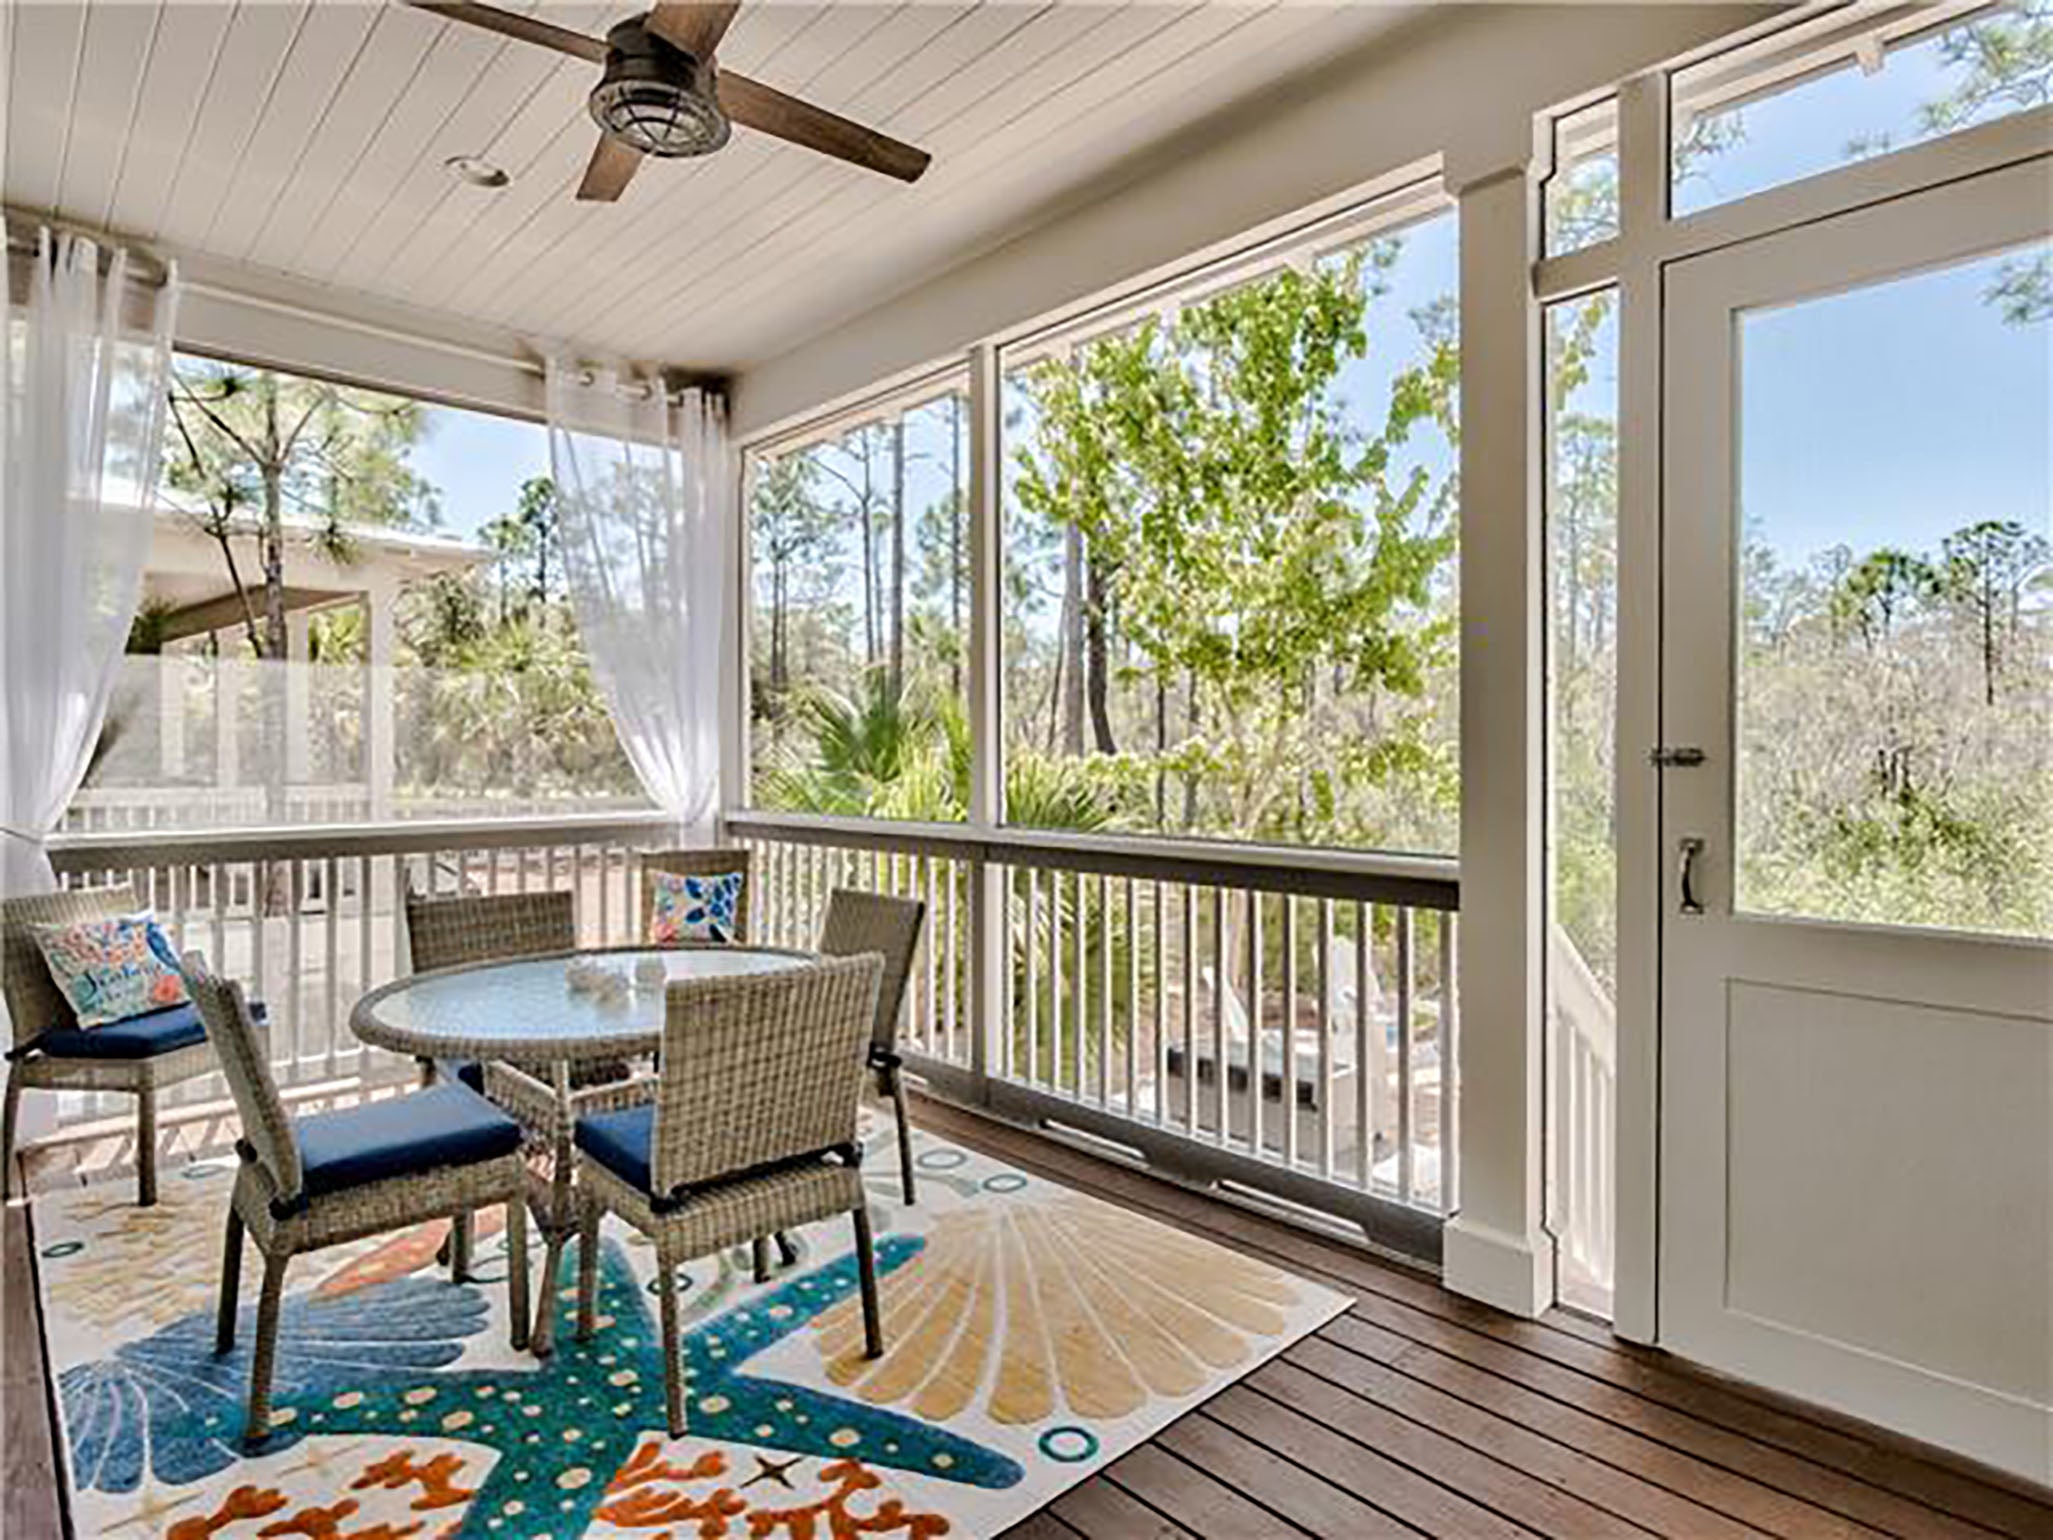 The screened porch has dining space for 6.